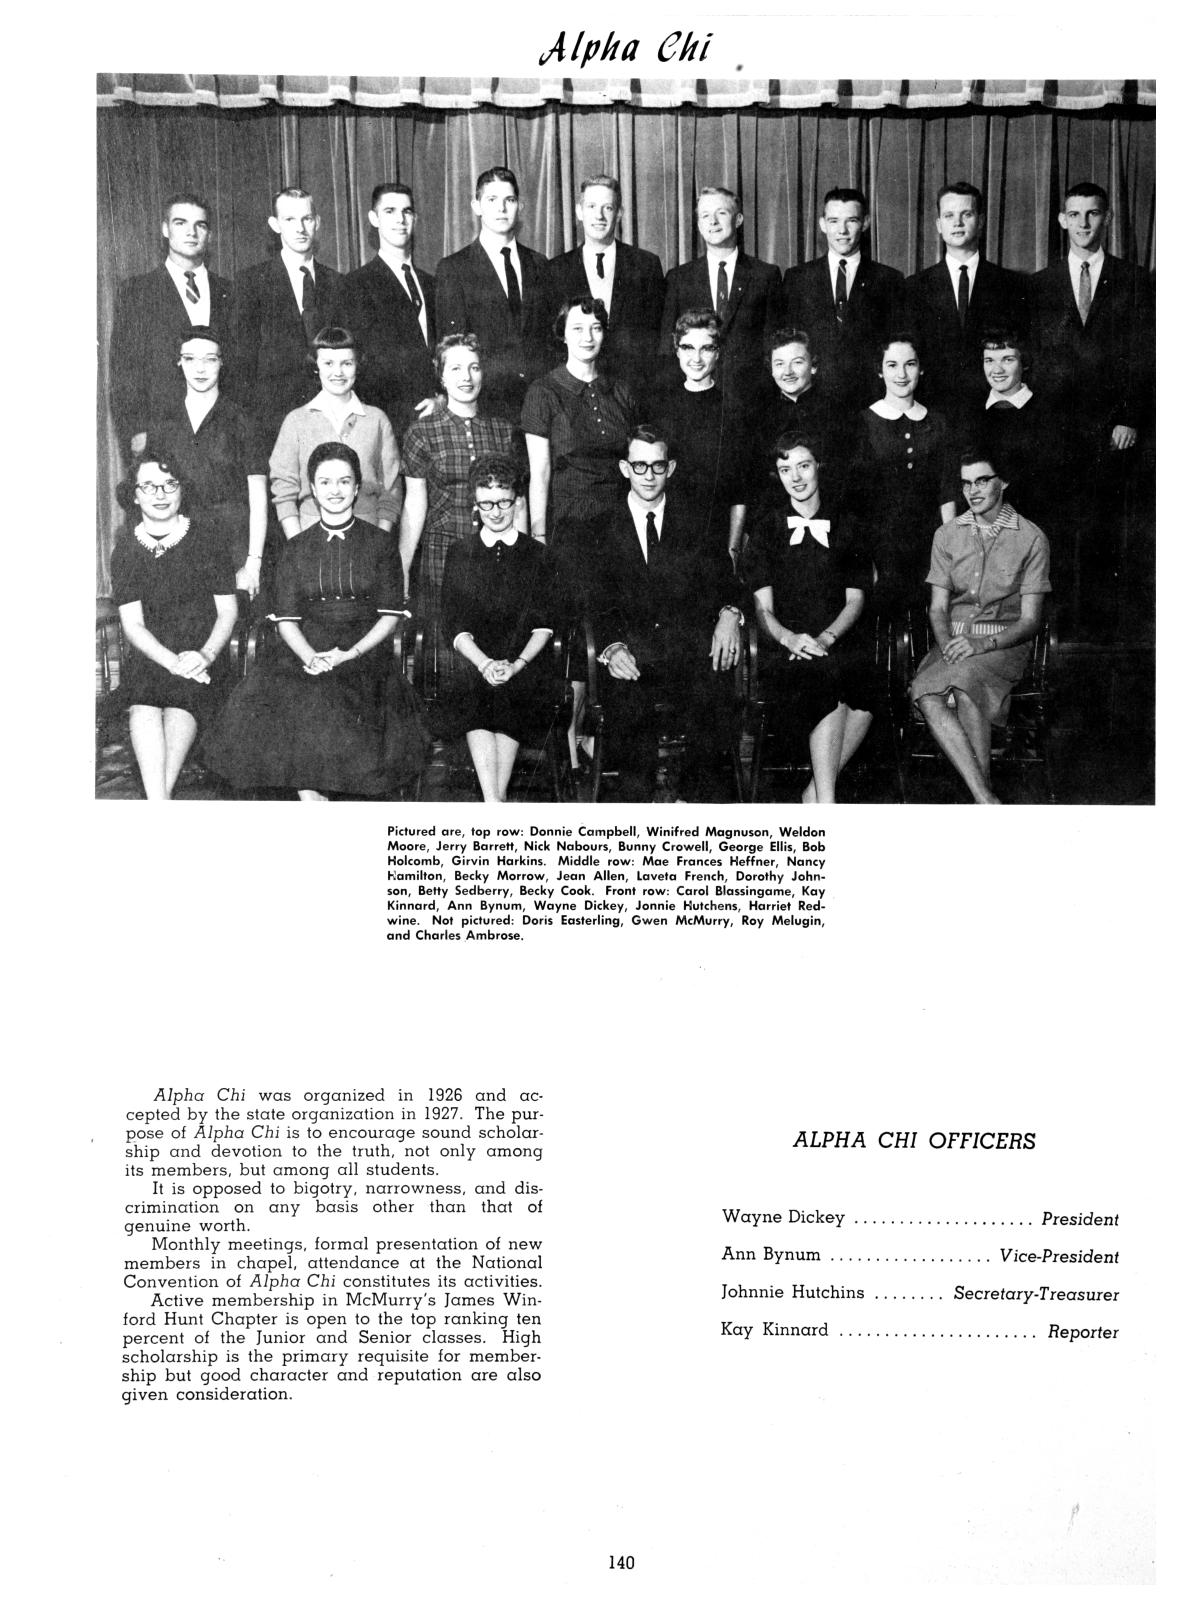 The Totem, Yearbook of McMurry College, 1959
                                                
                                                    140
                                                